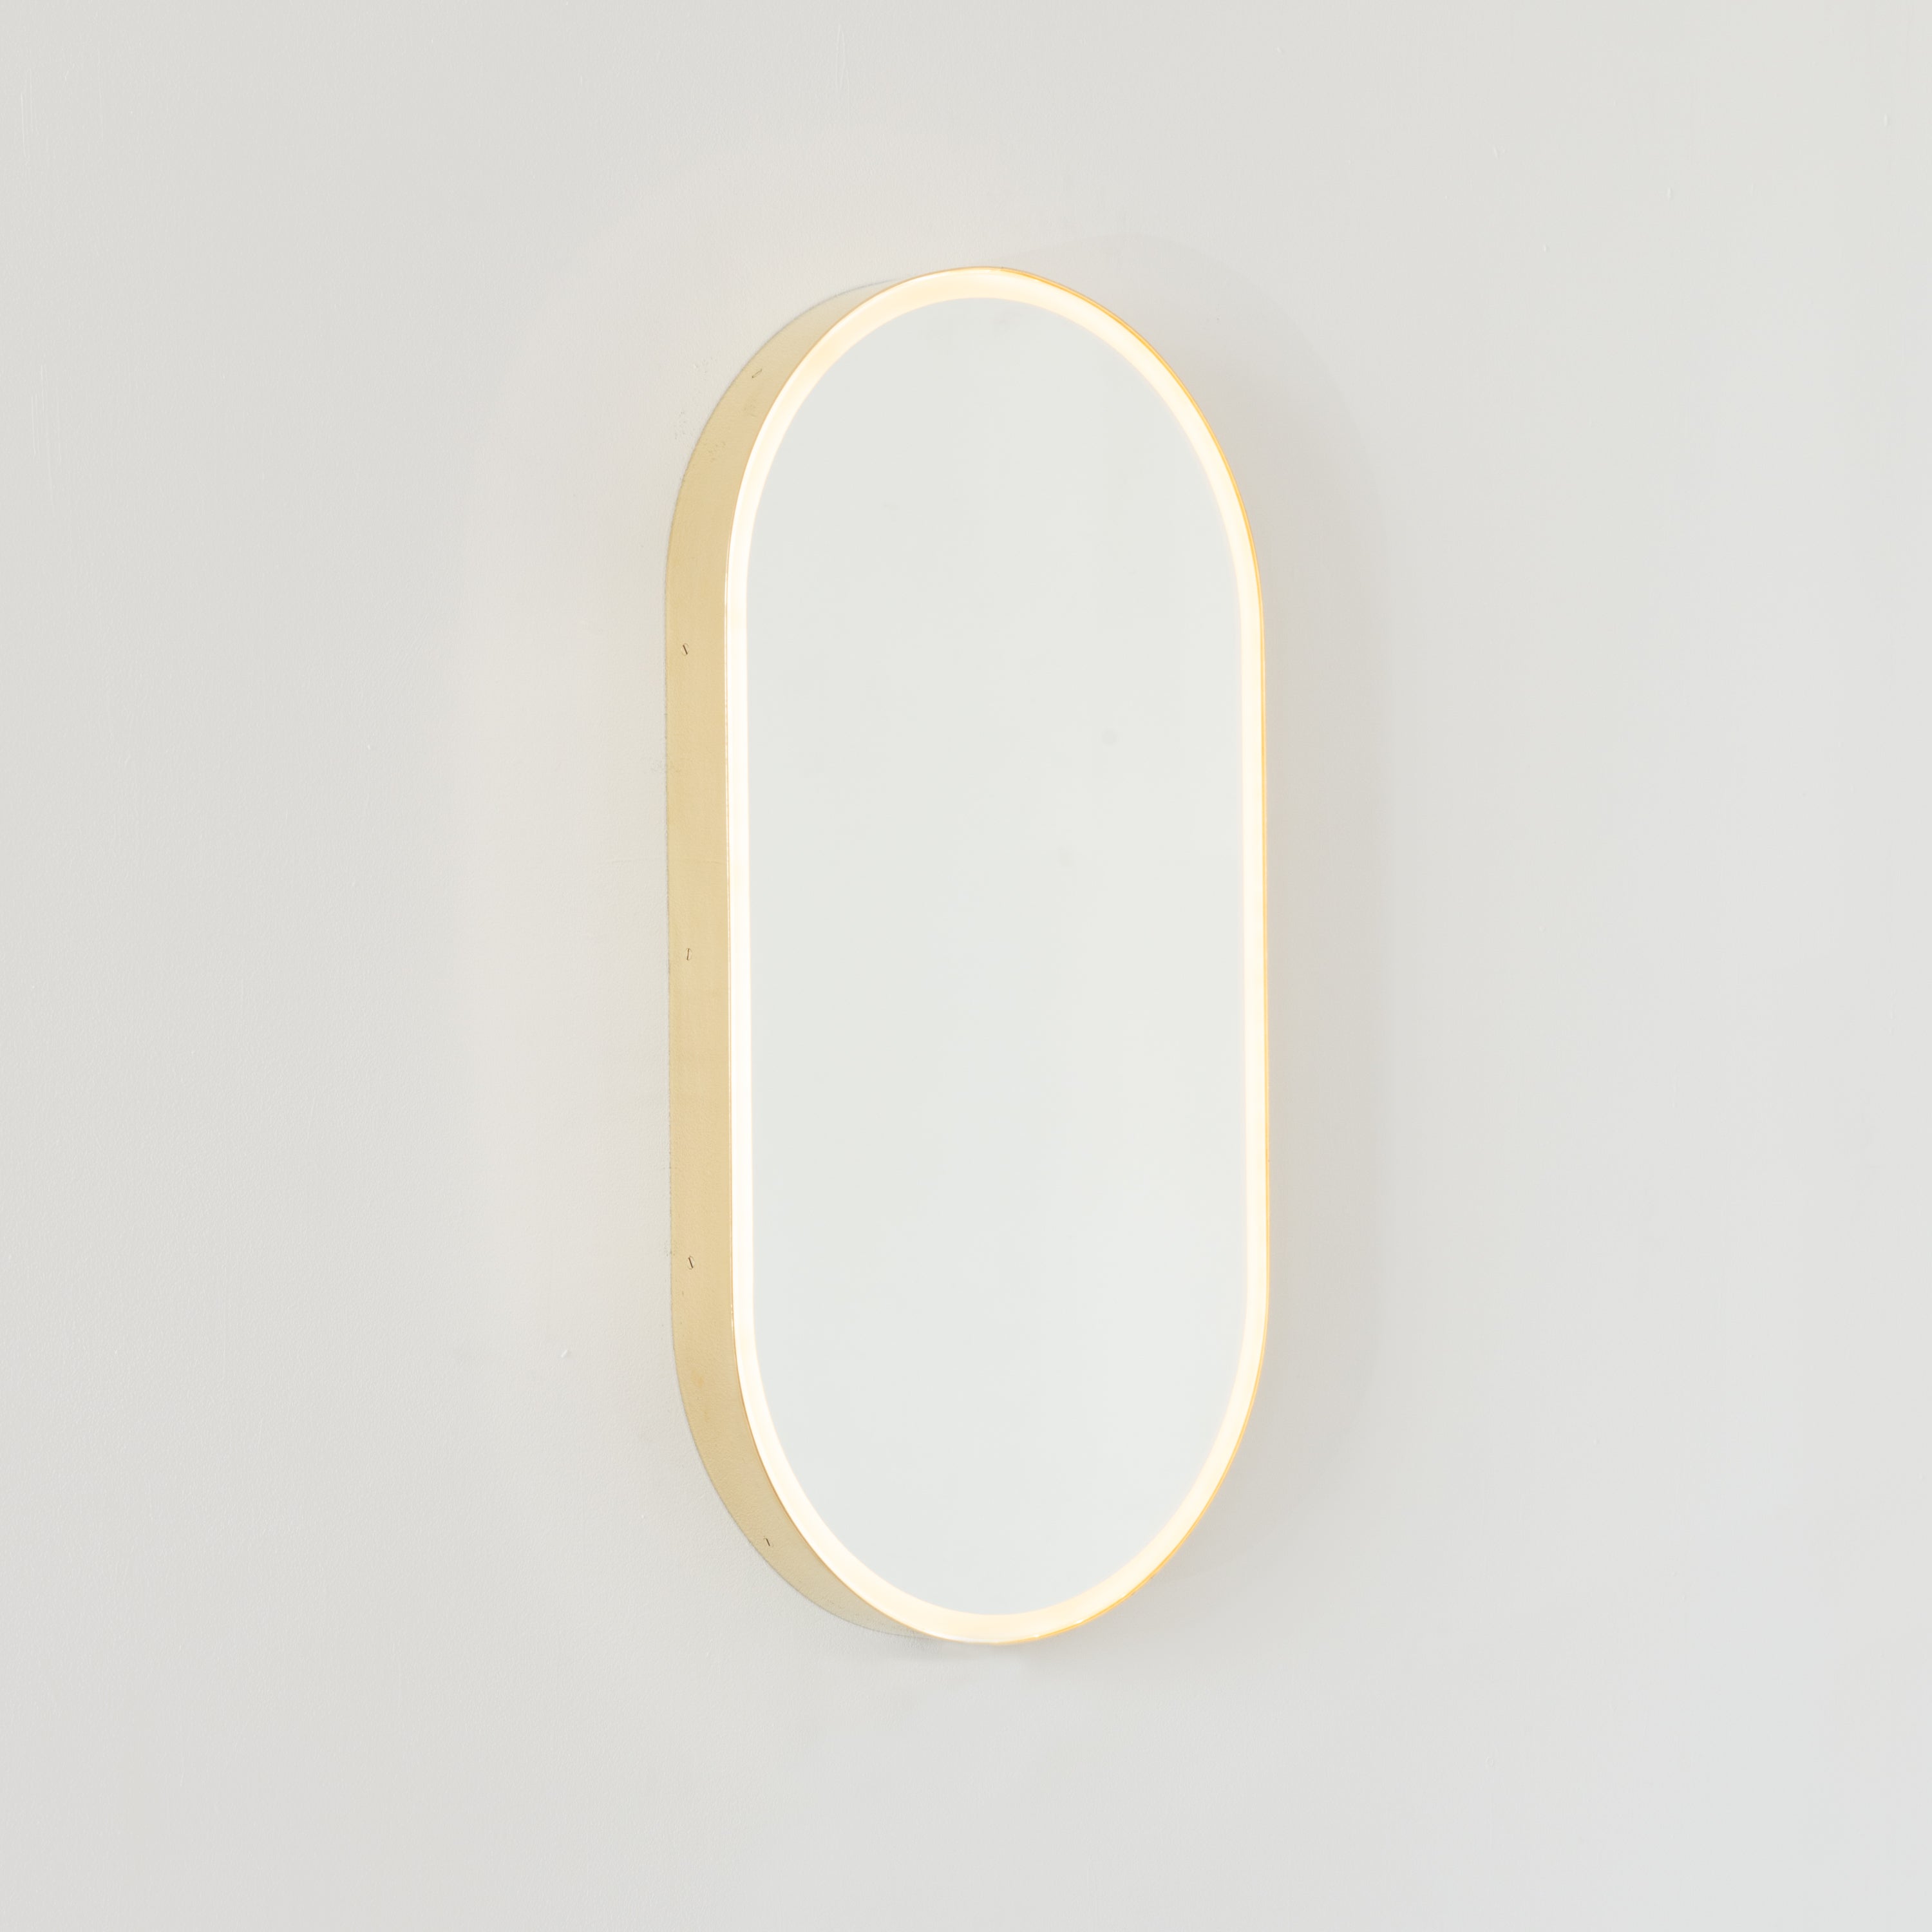 Capsula Illuminated Capsule Shaped Customisable Mirror with Brass Frame, Large In New Condition For Sale In London, GB